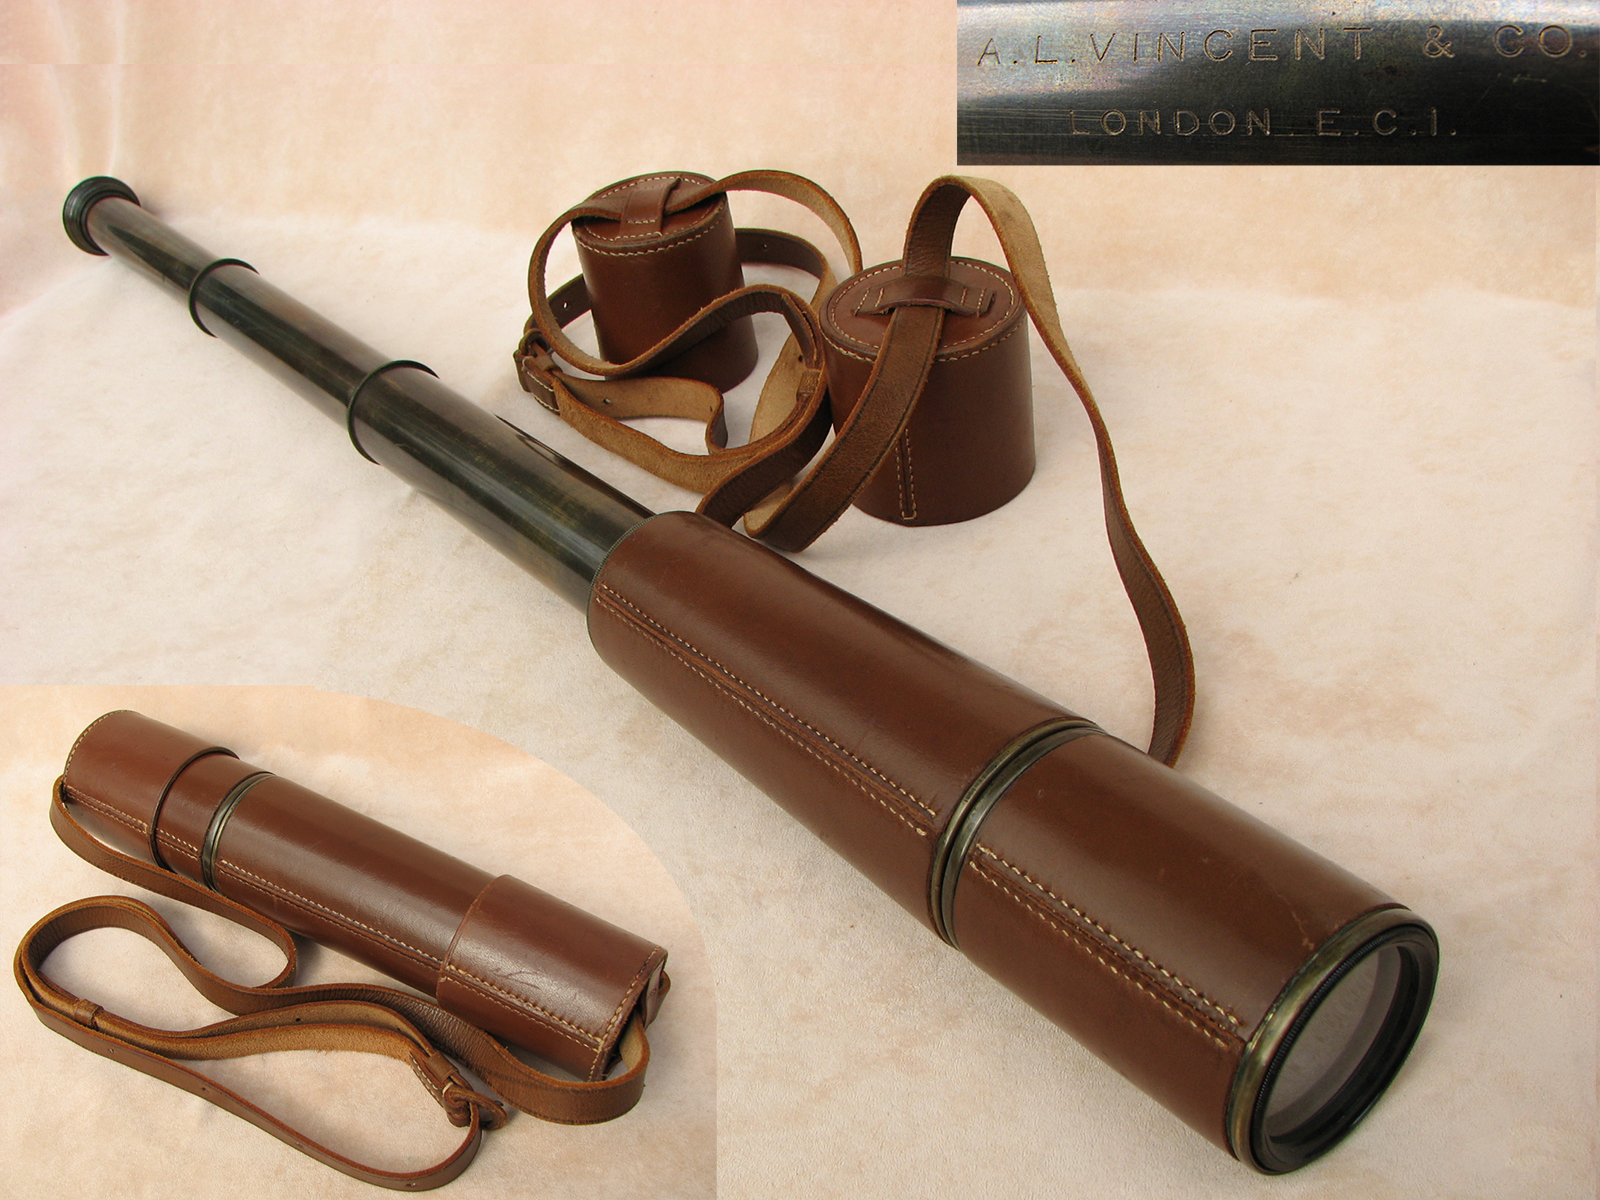 Rare early 20th century field telescope by A.L Vincent, London.